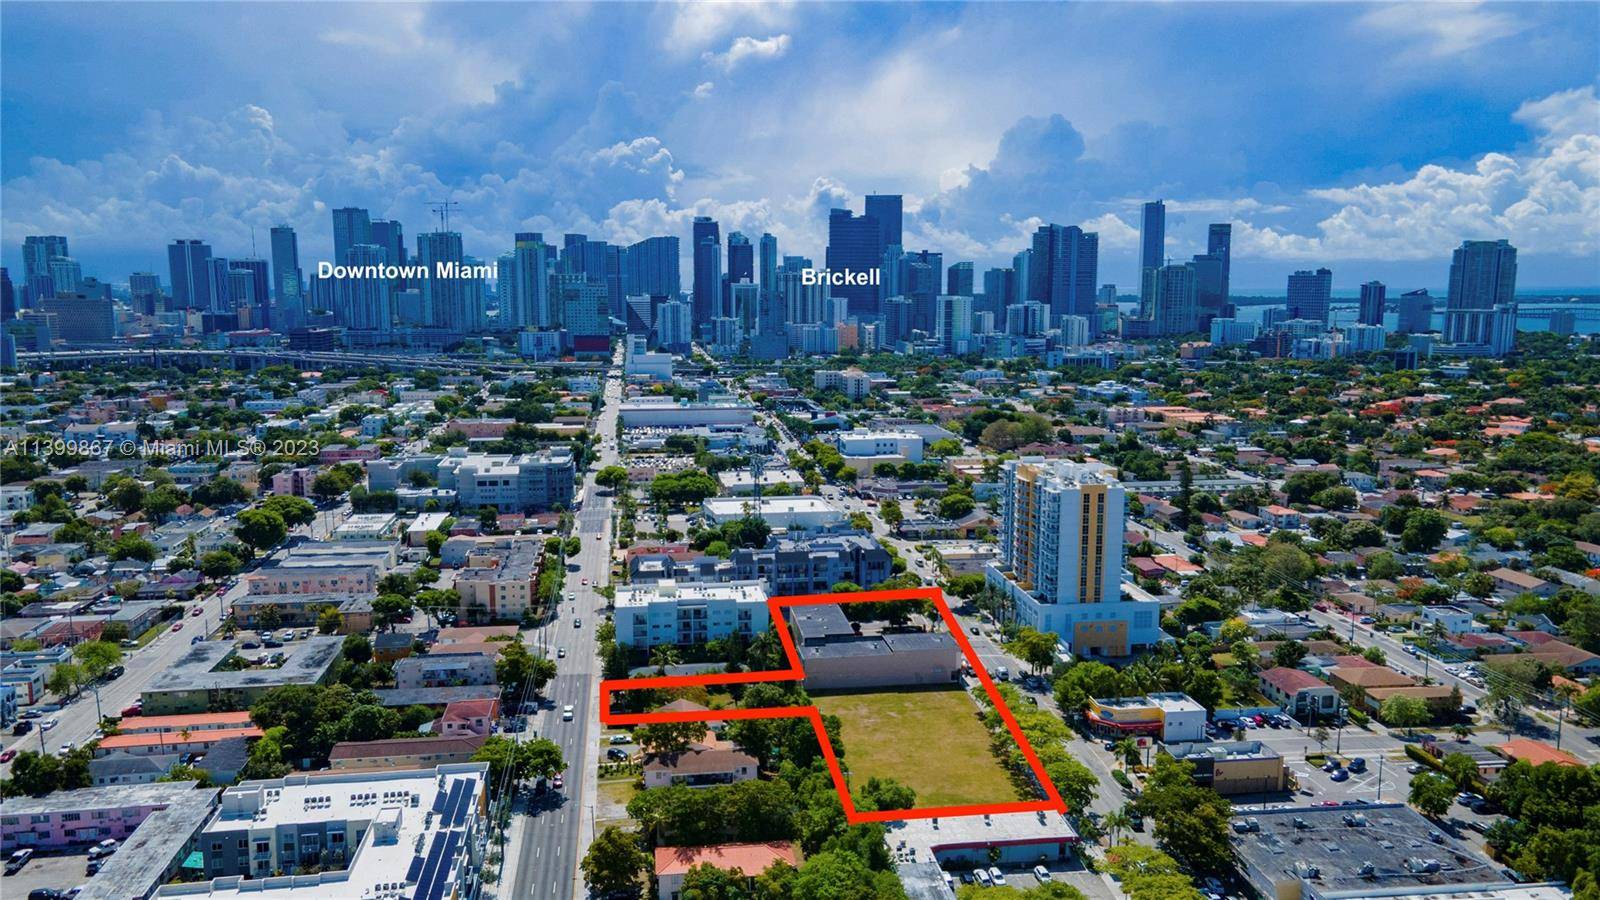 PG Capital Realty is pleased to present Calle 8 Assemblage in the heart of Little Havana.